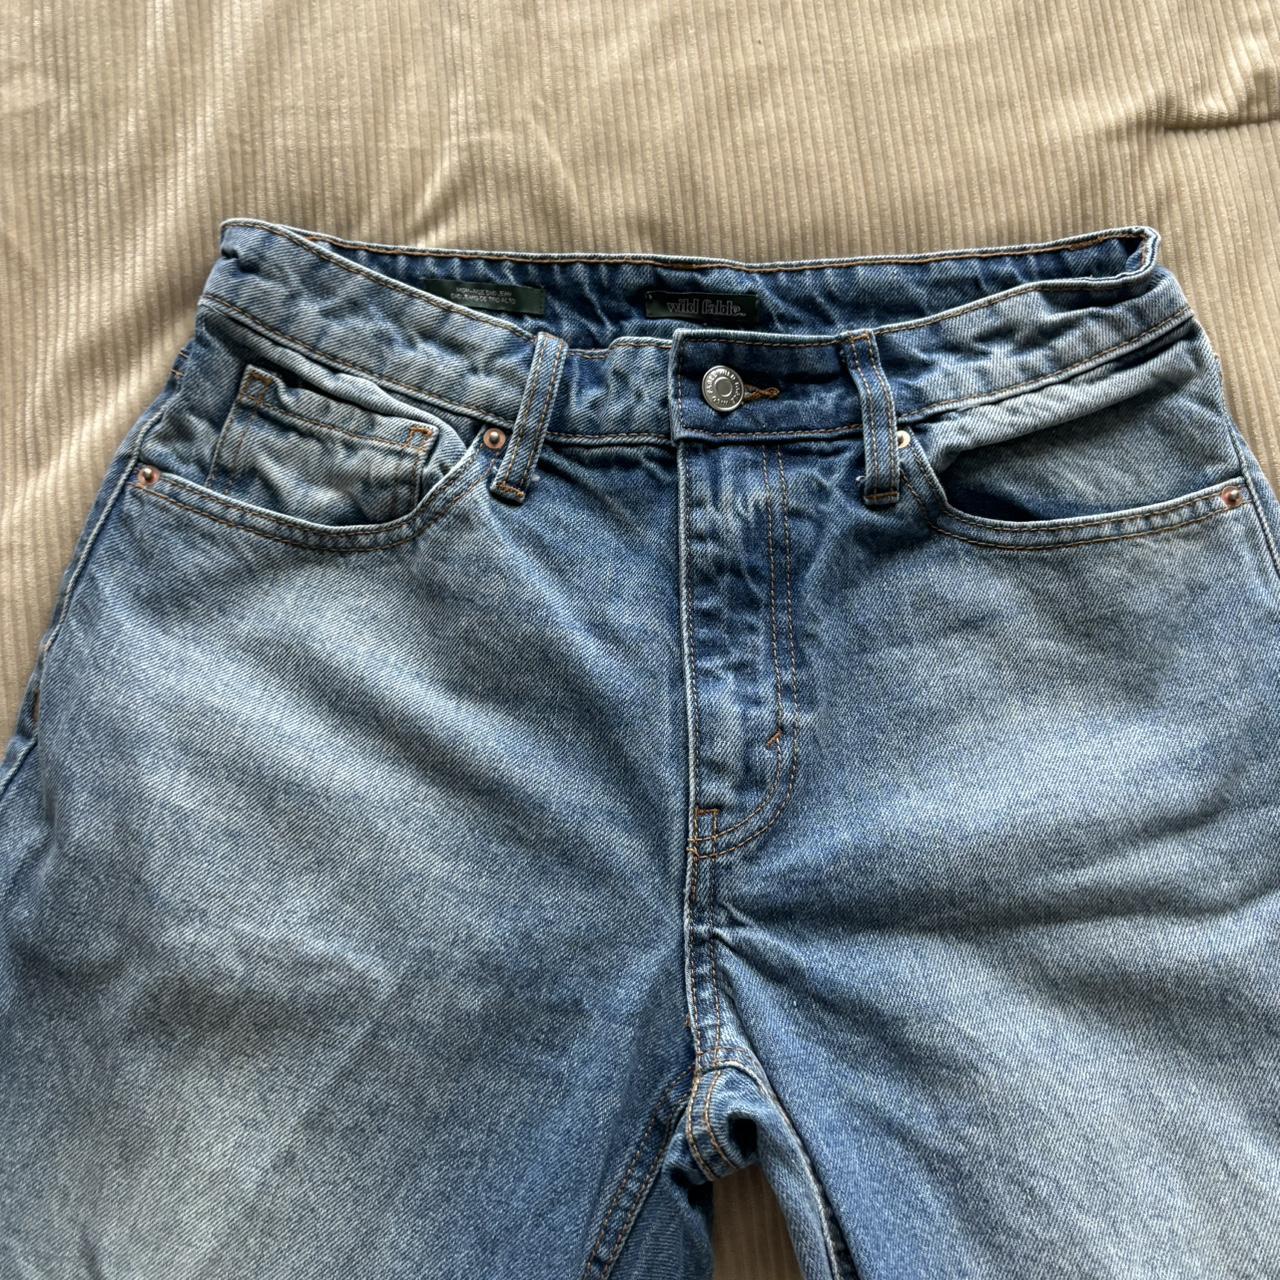 Wild Fable High Rise Dad Jeans Send offers!!! - Depop